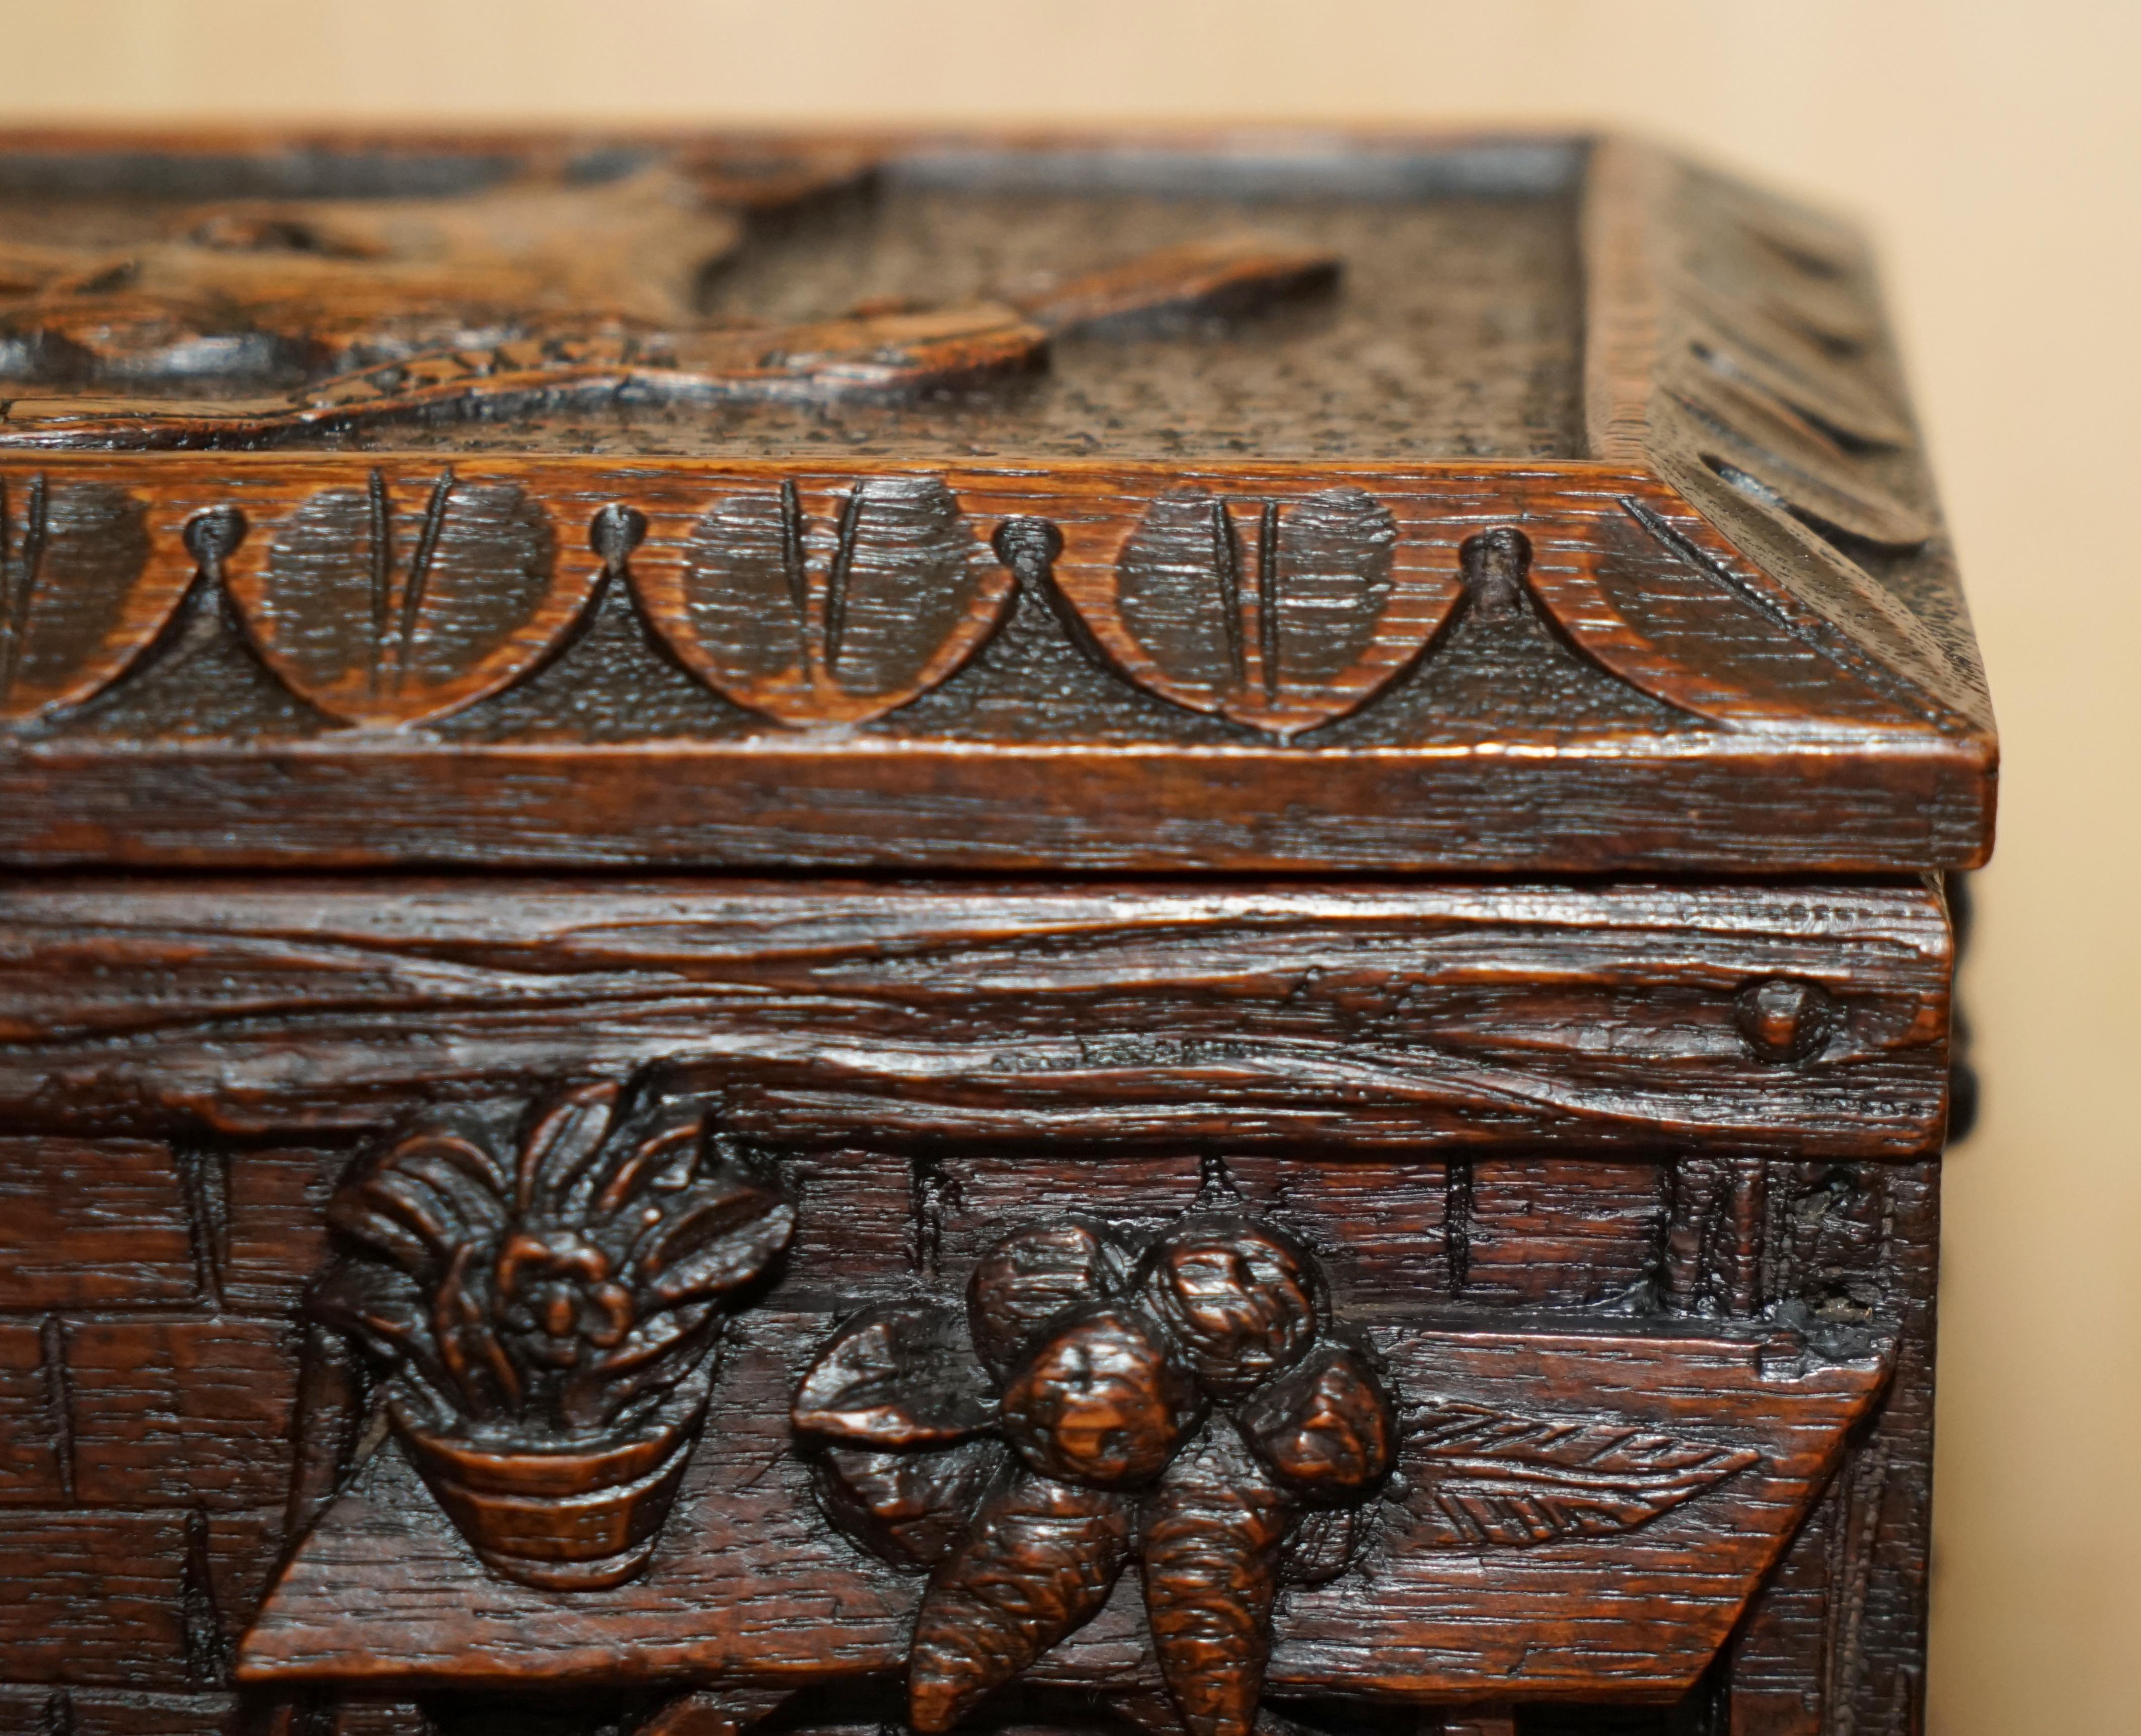 Black Forest CARVED BLACK FOREST WOOD SMOKiNG PIPE CABINET BOX LATIN INSCRIBED NIL NISI CRUCE For Sale